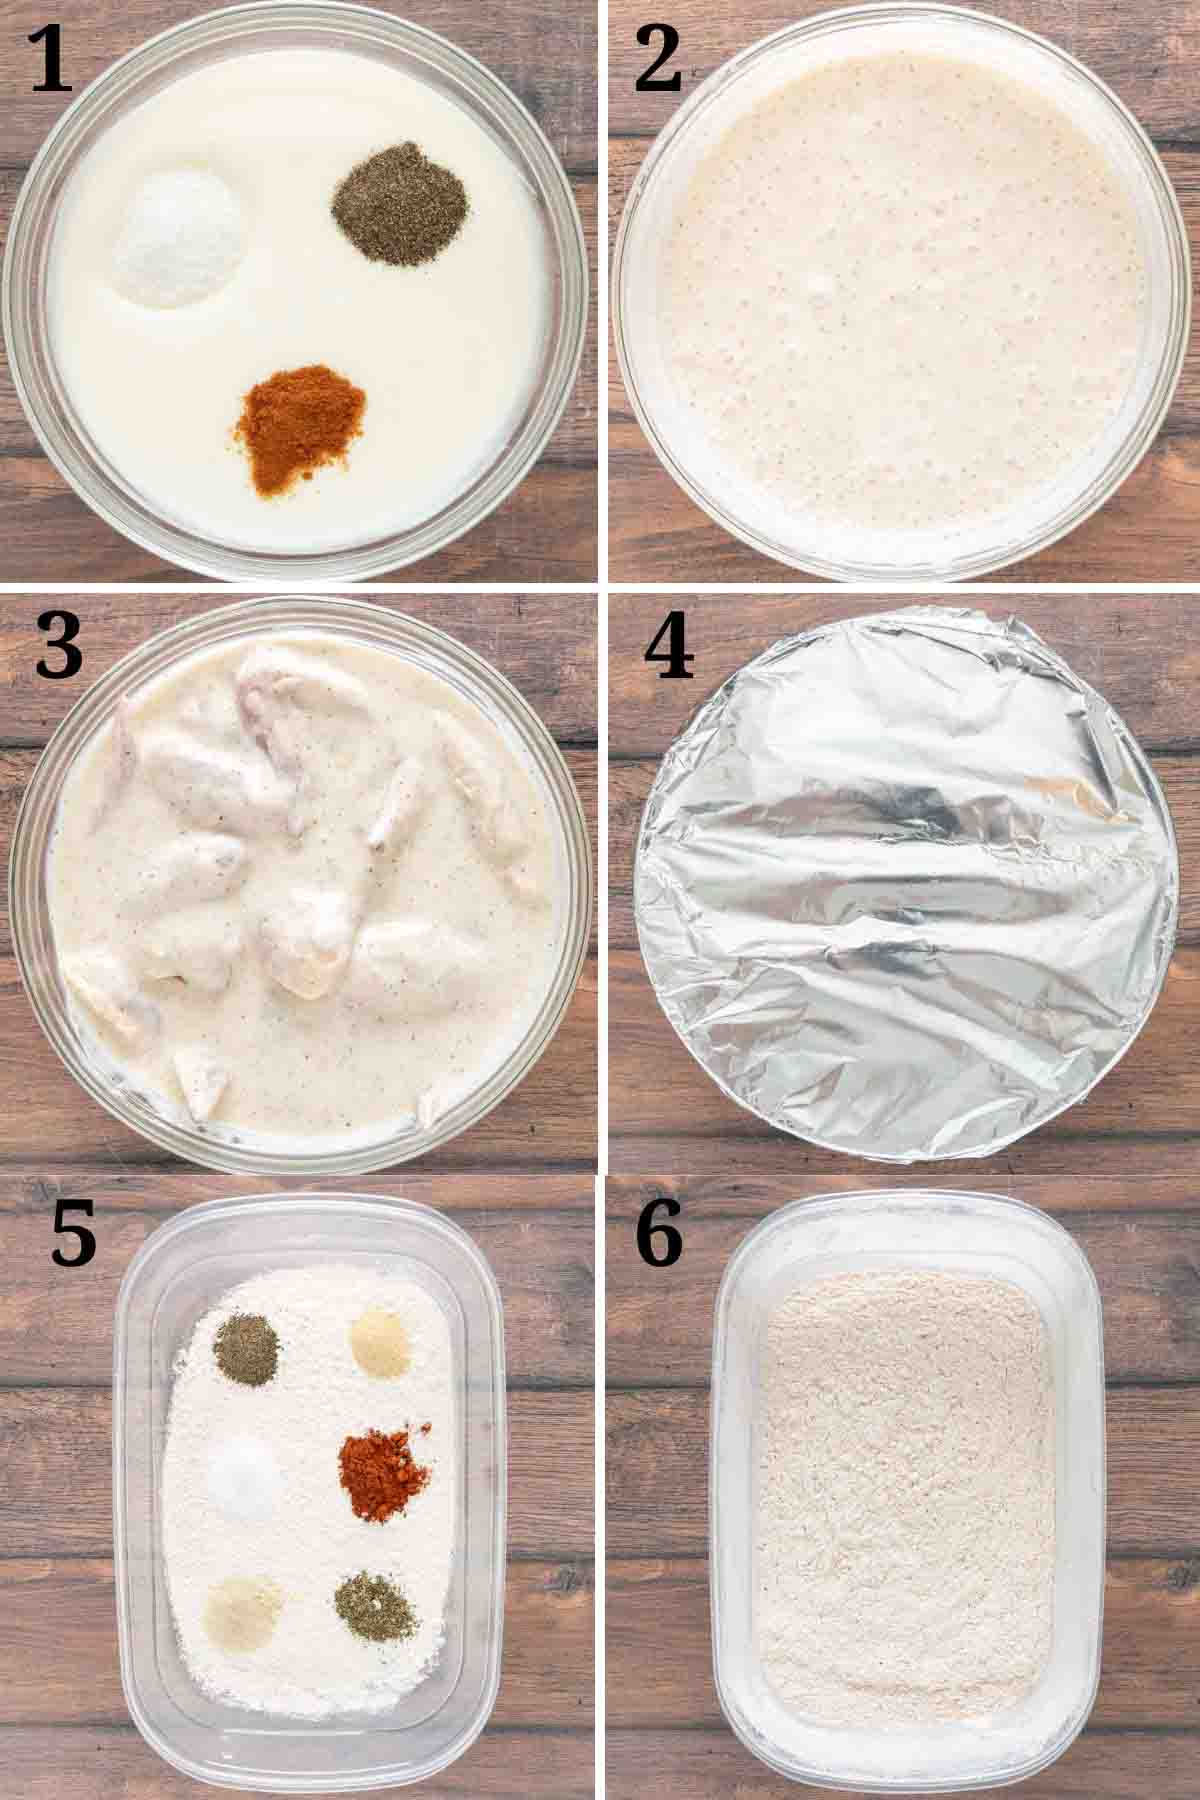 Collage showing how to make recipe.